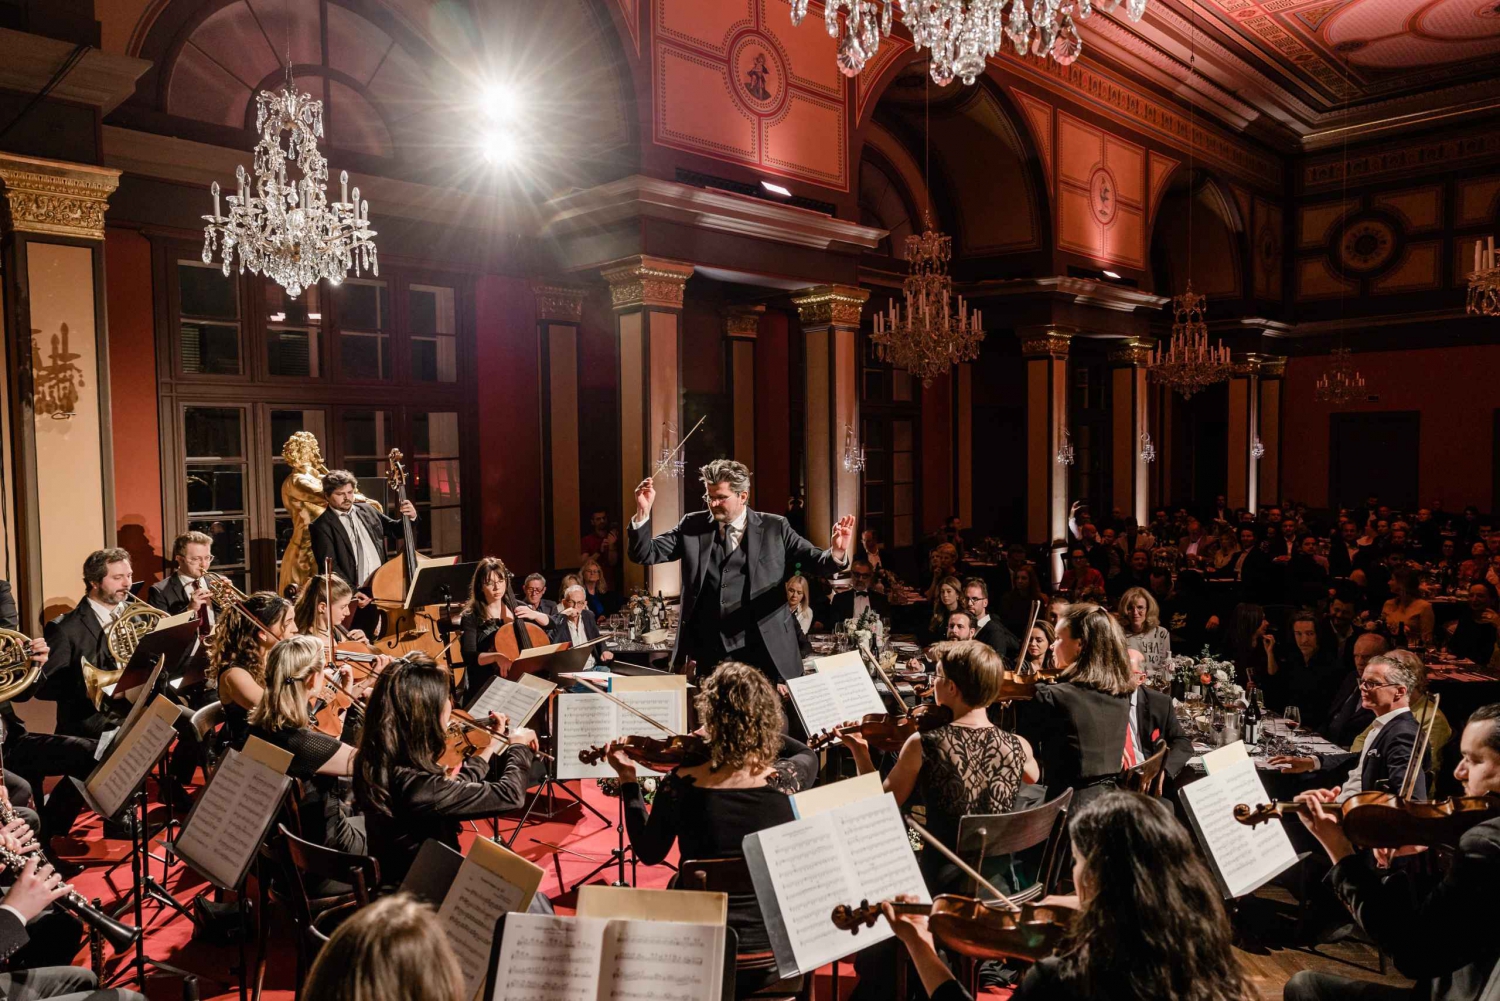 House of Strauss: Concert Show including Museum (Category A)